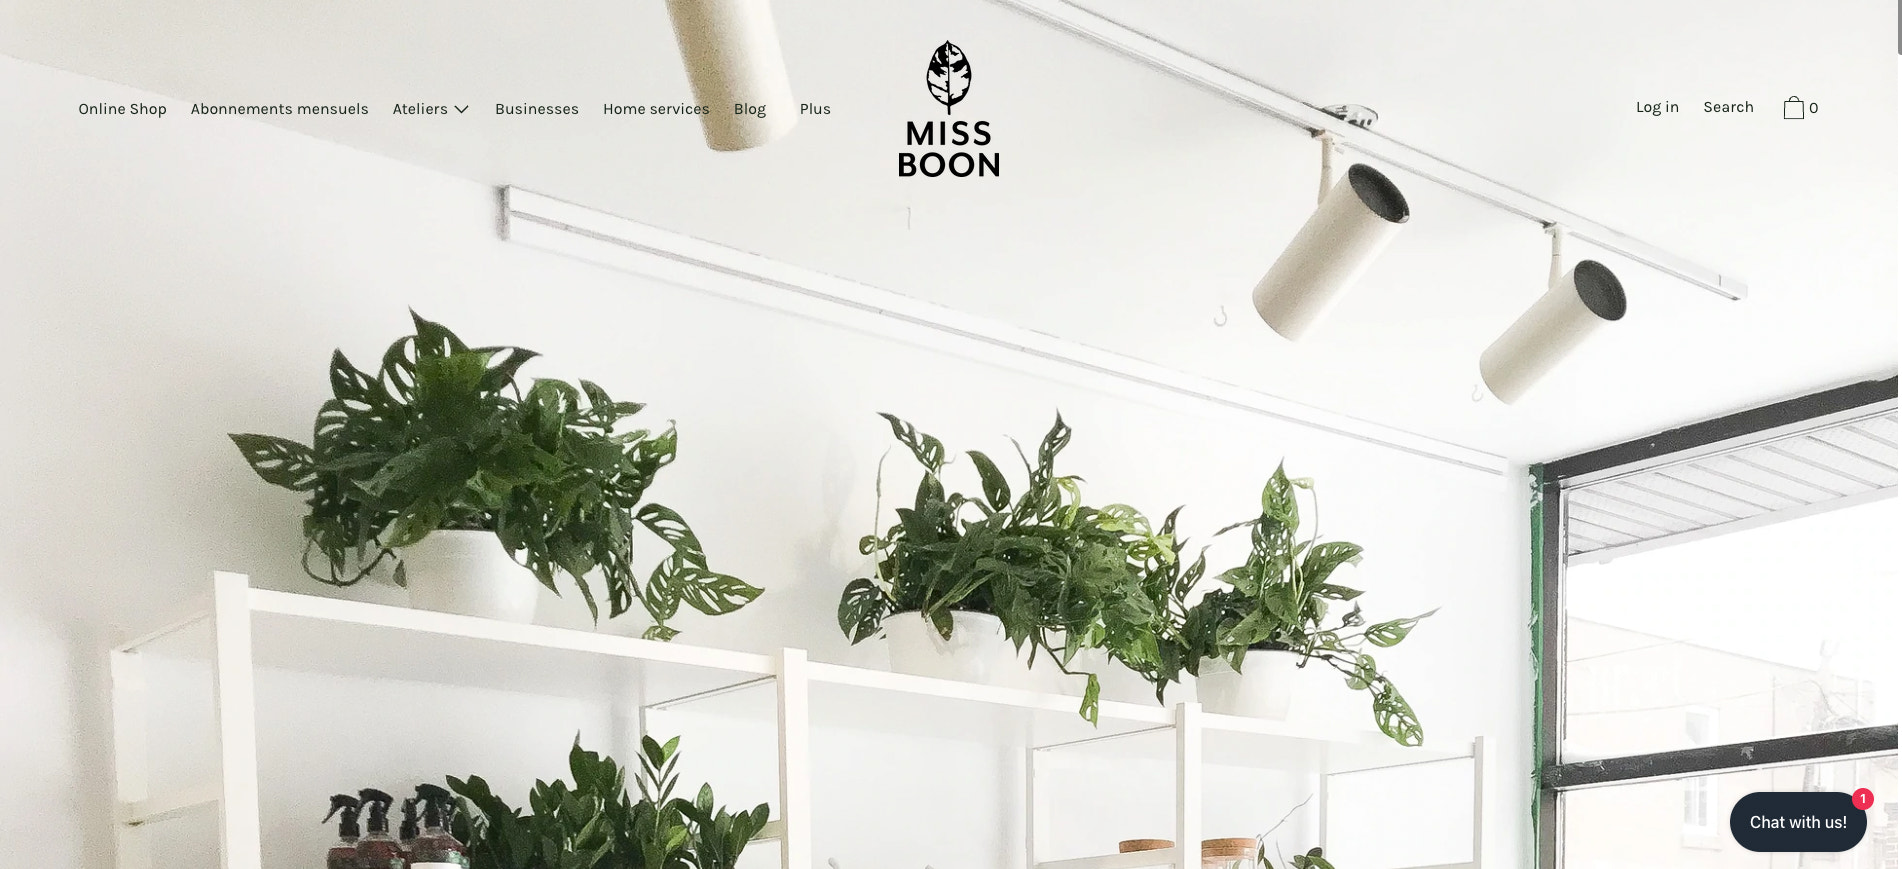 A screenshot of the Miss Boon homepage featuring a plant-filled hero image